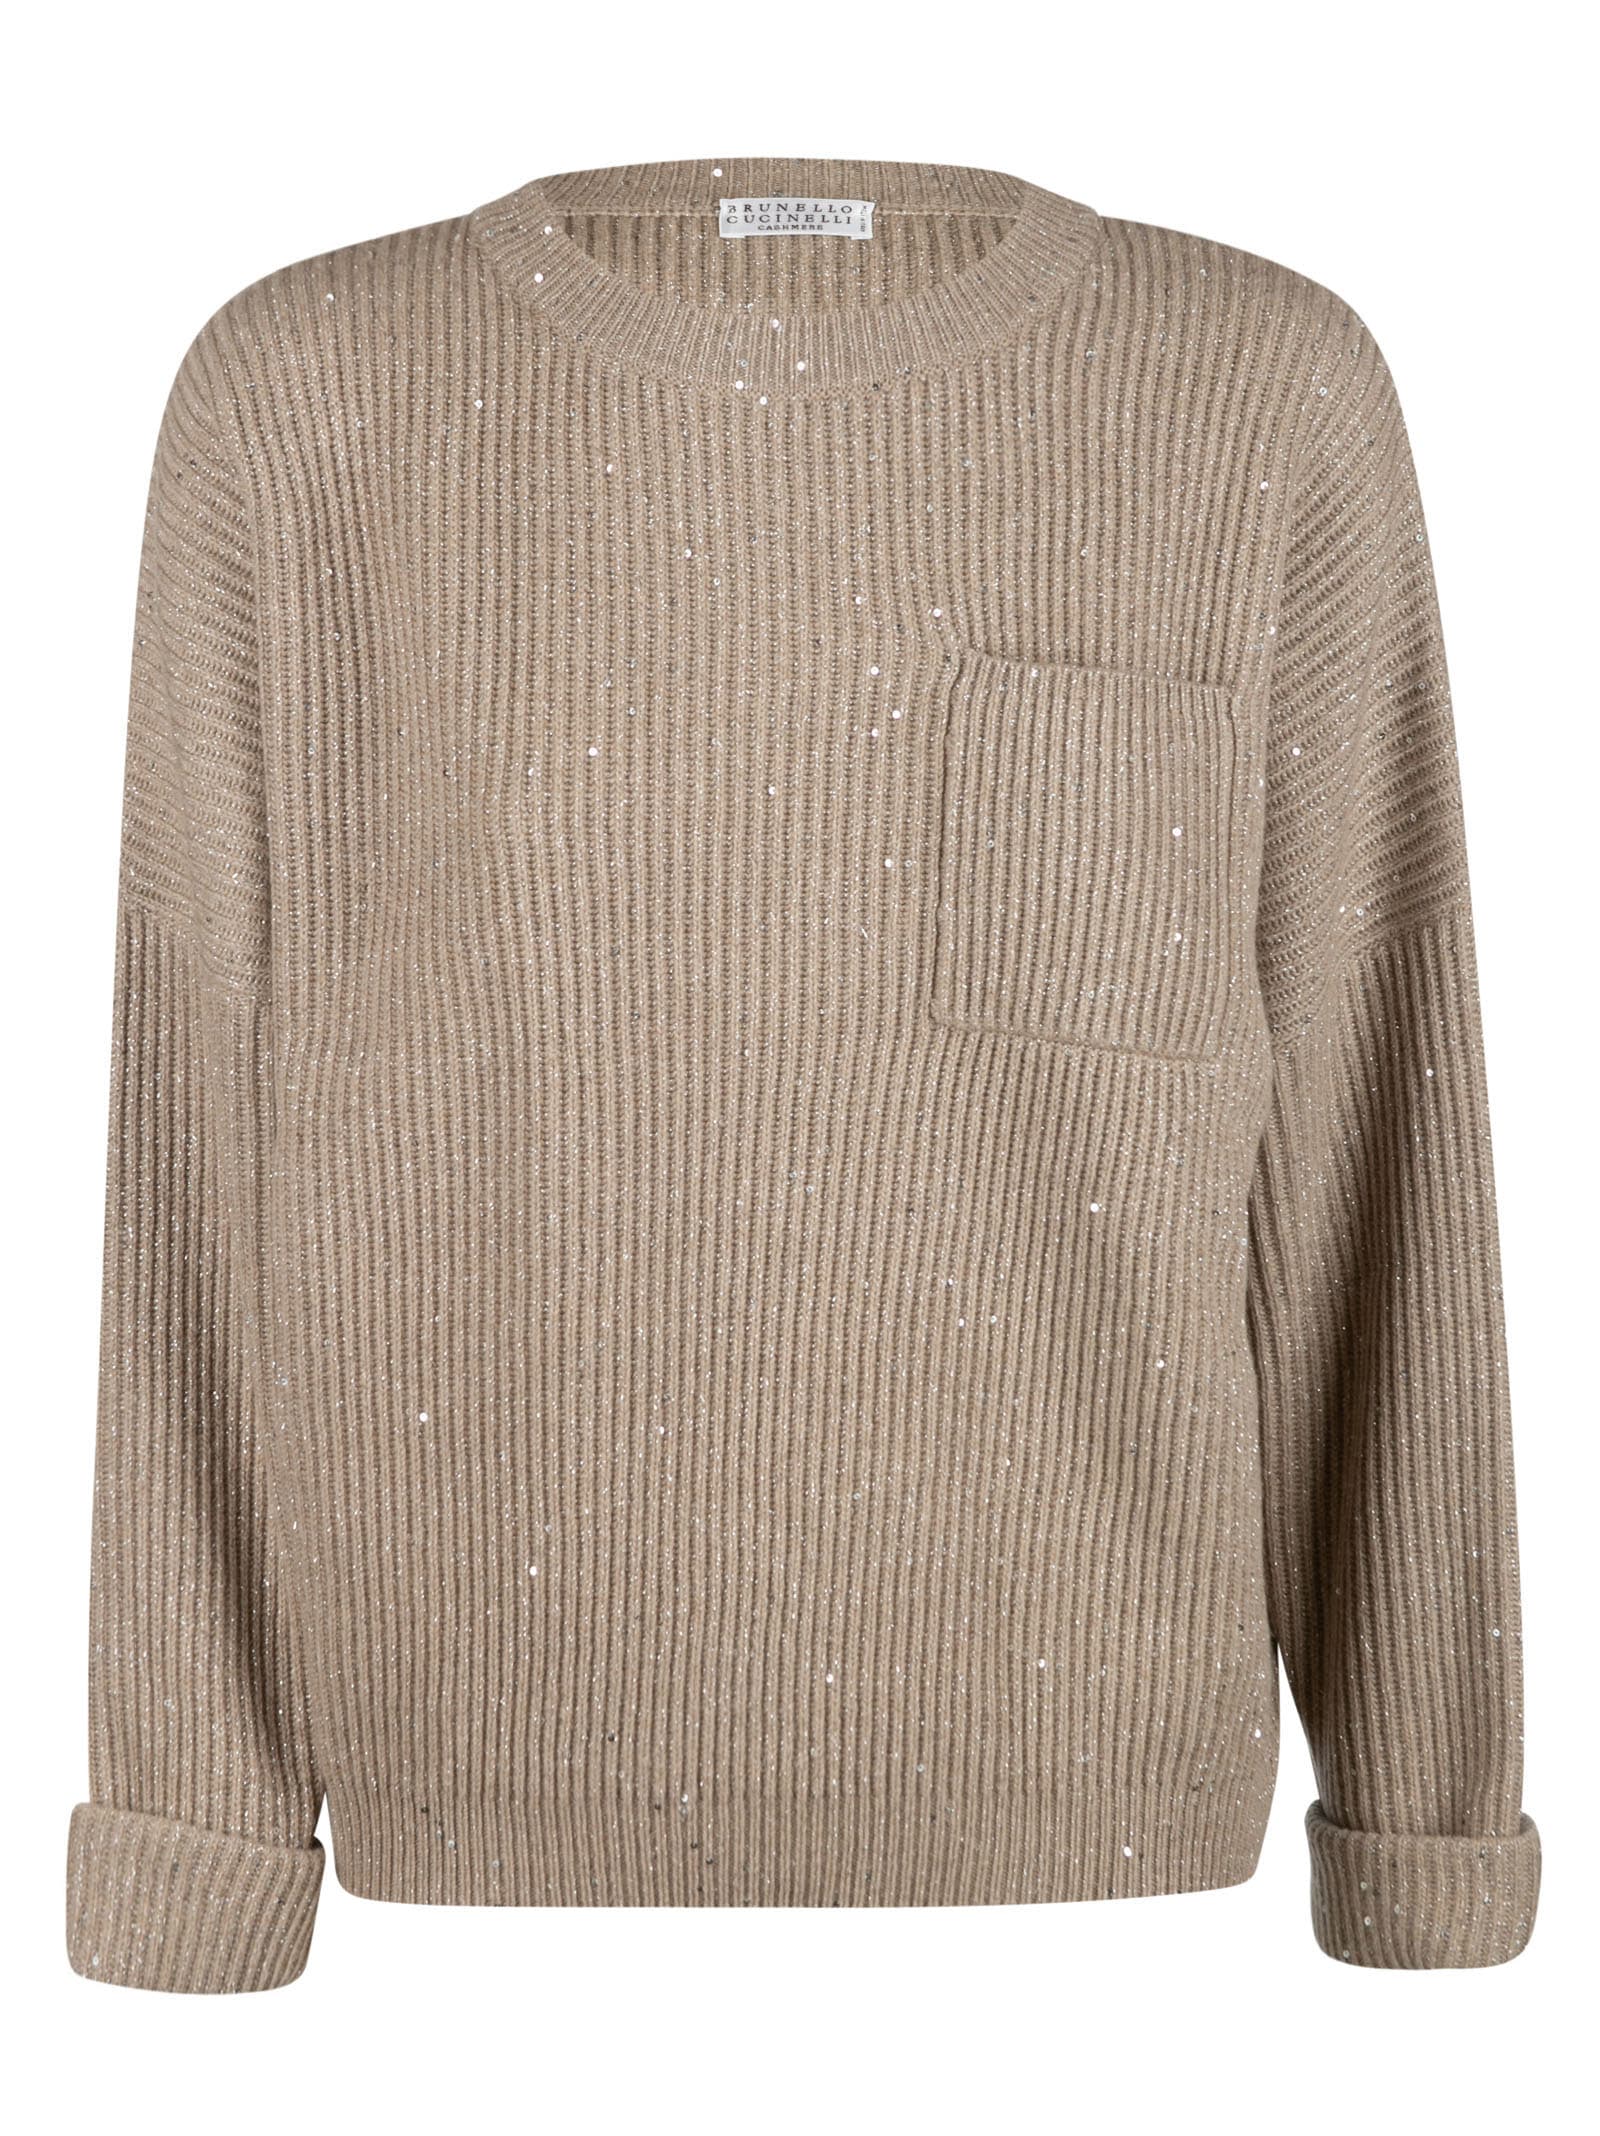 Brunello Cucinelli Patched Pocket Woven Sweater